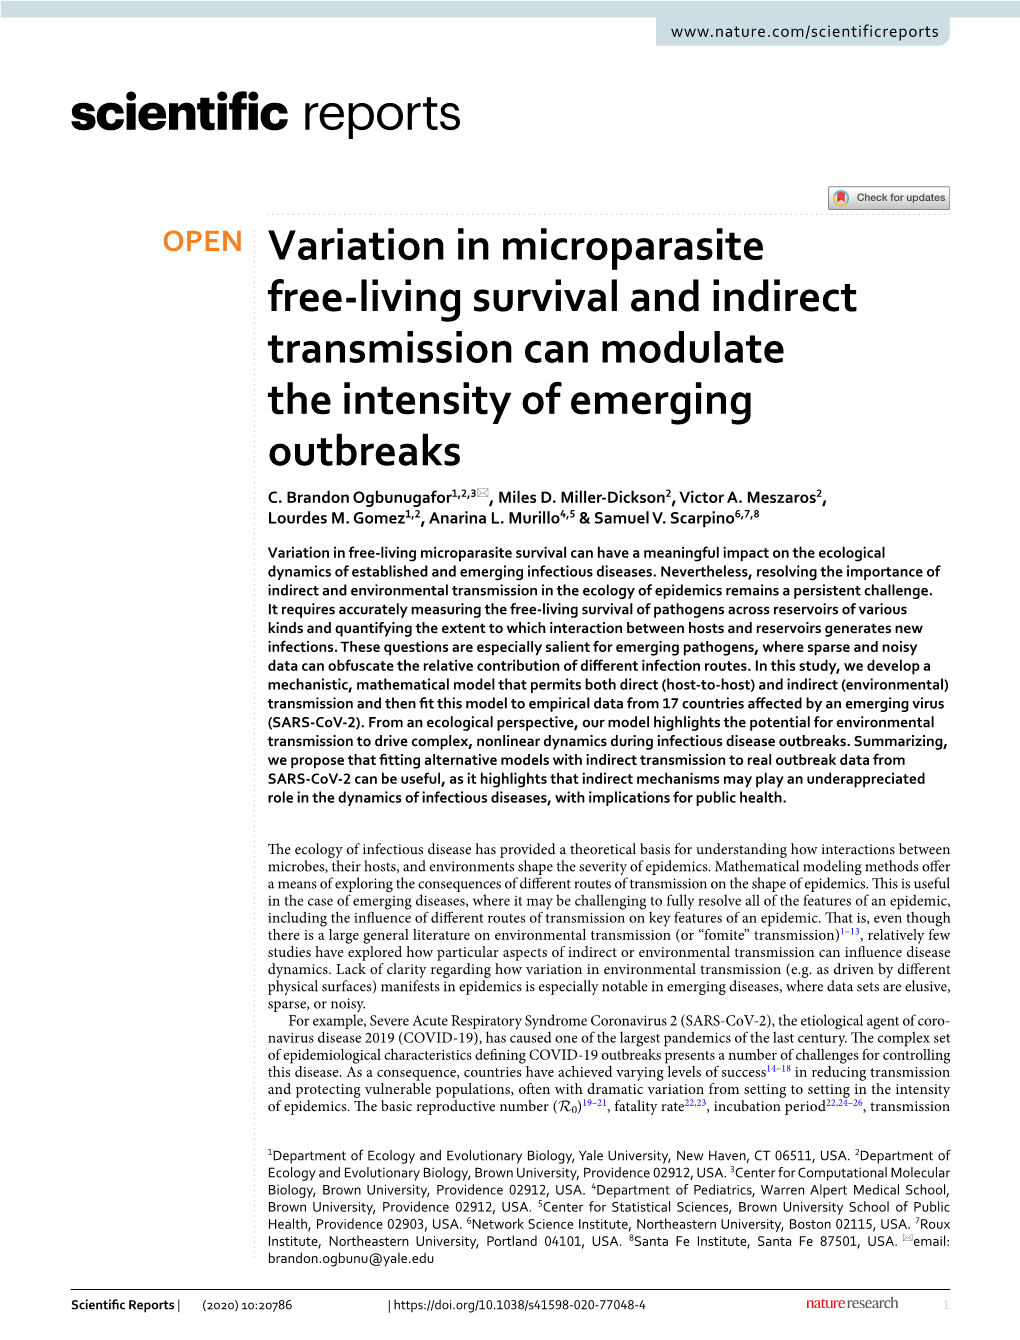 Variation in Microparasite Free-Living Survival and Indirect Transmission